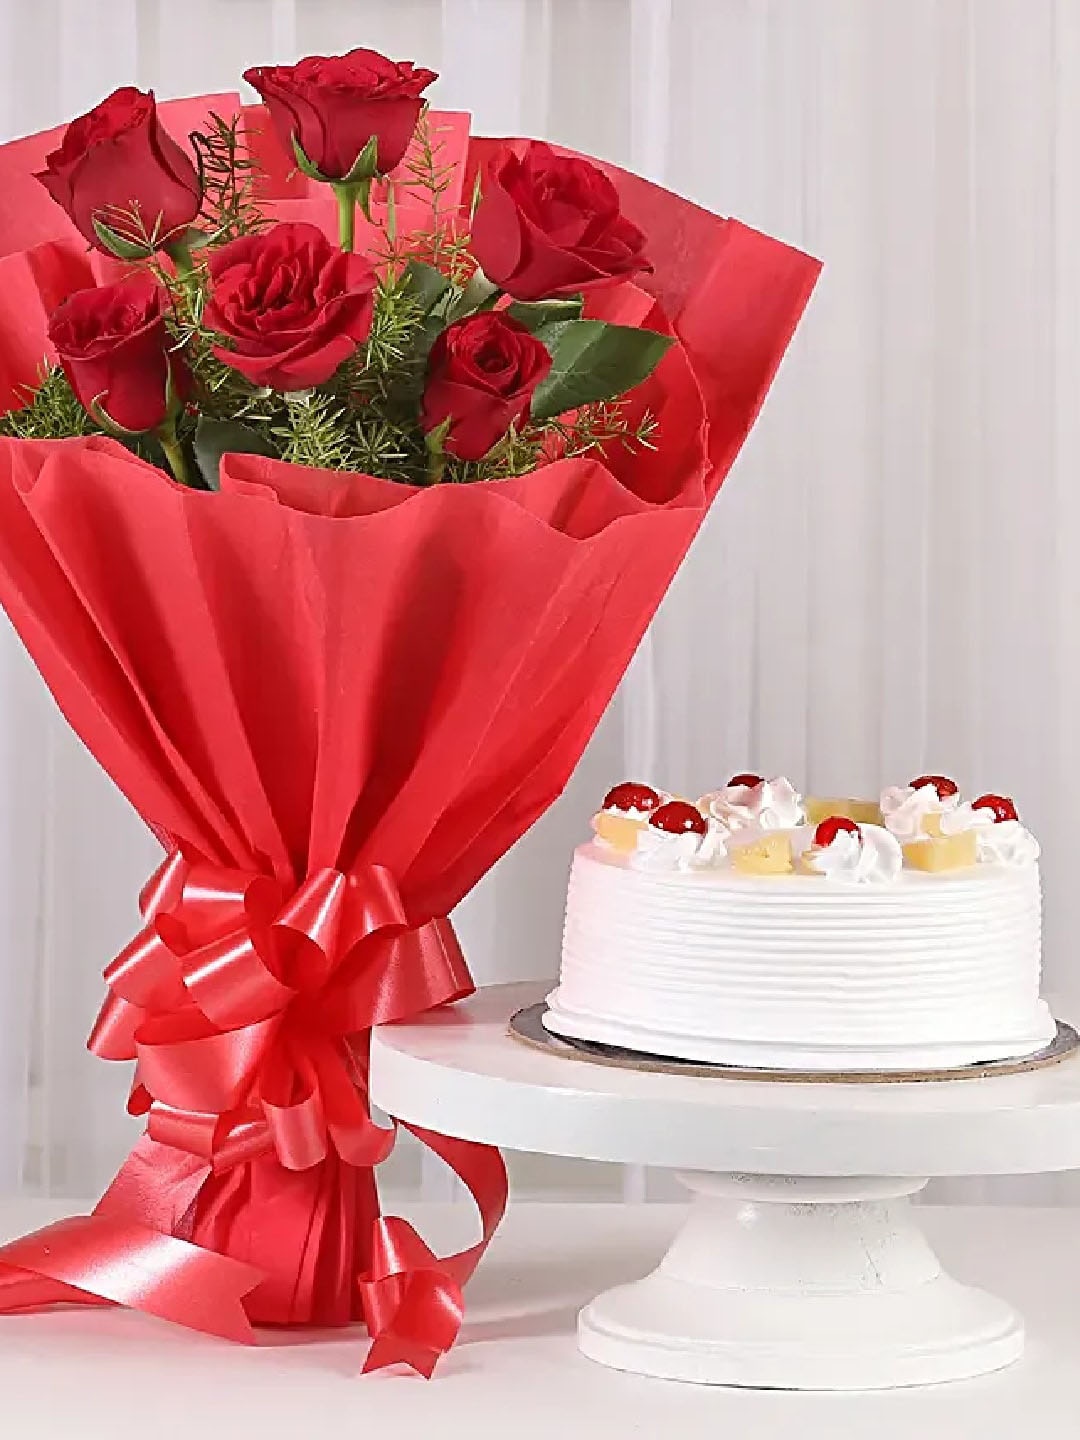 

fnp Set Of 2 Roses & Round Pineapple Cream Cake Gift - 500 Gms, Red